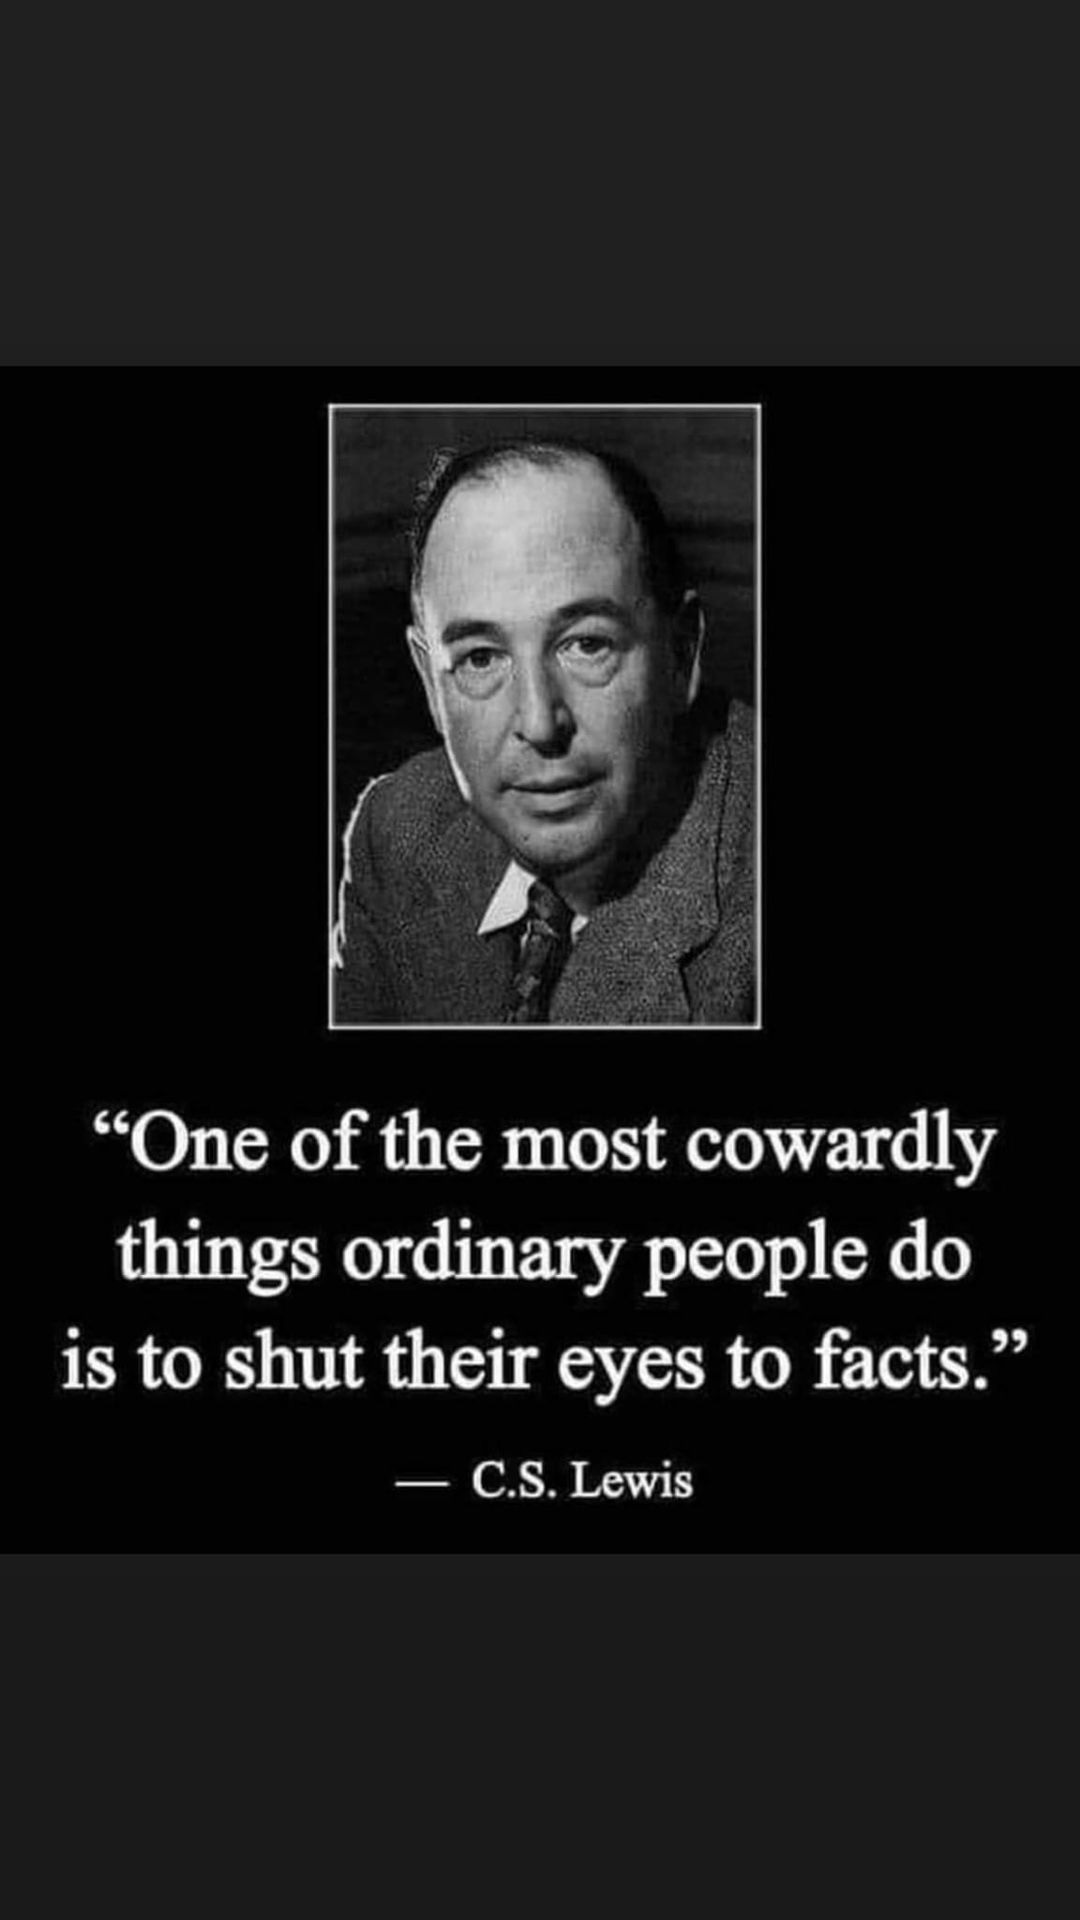 May be an image of 1 person and text that says ""One of the most cowardly things ordinary people do is to shut their eyes to facts." C.S. Lewis"